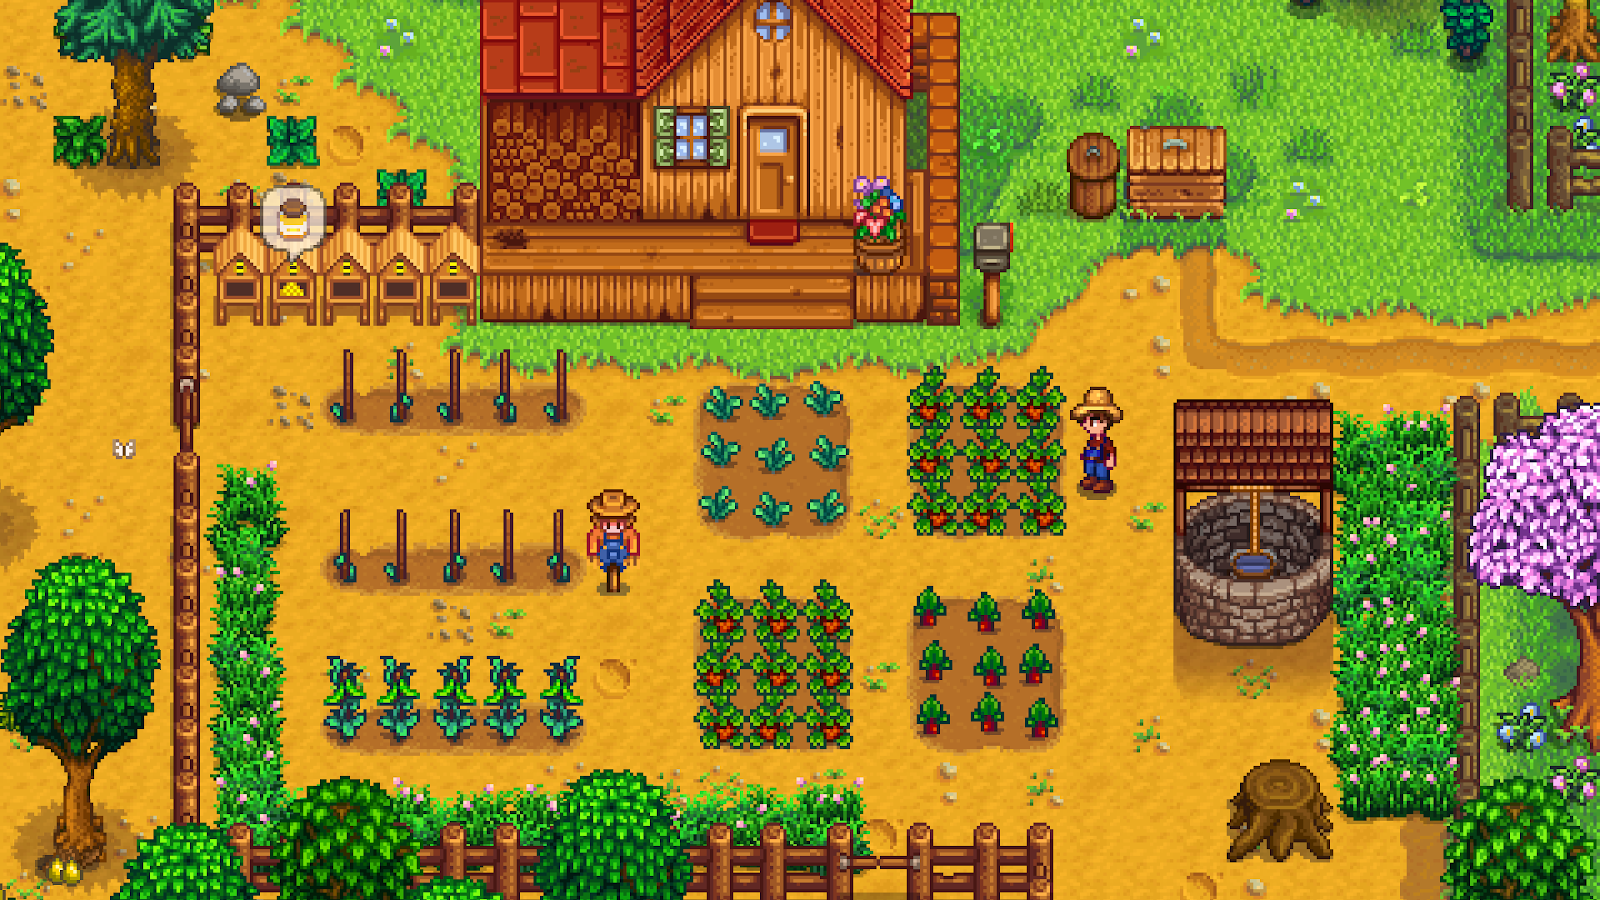 A screenshot of a farm plot in Stardew Valley with the house, some crops, beehives, a well, a scarecrow, and the player character